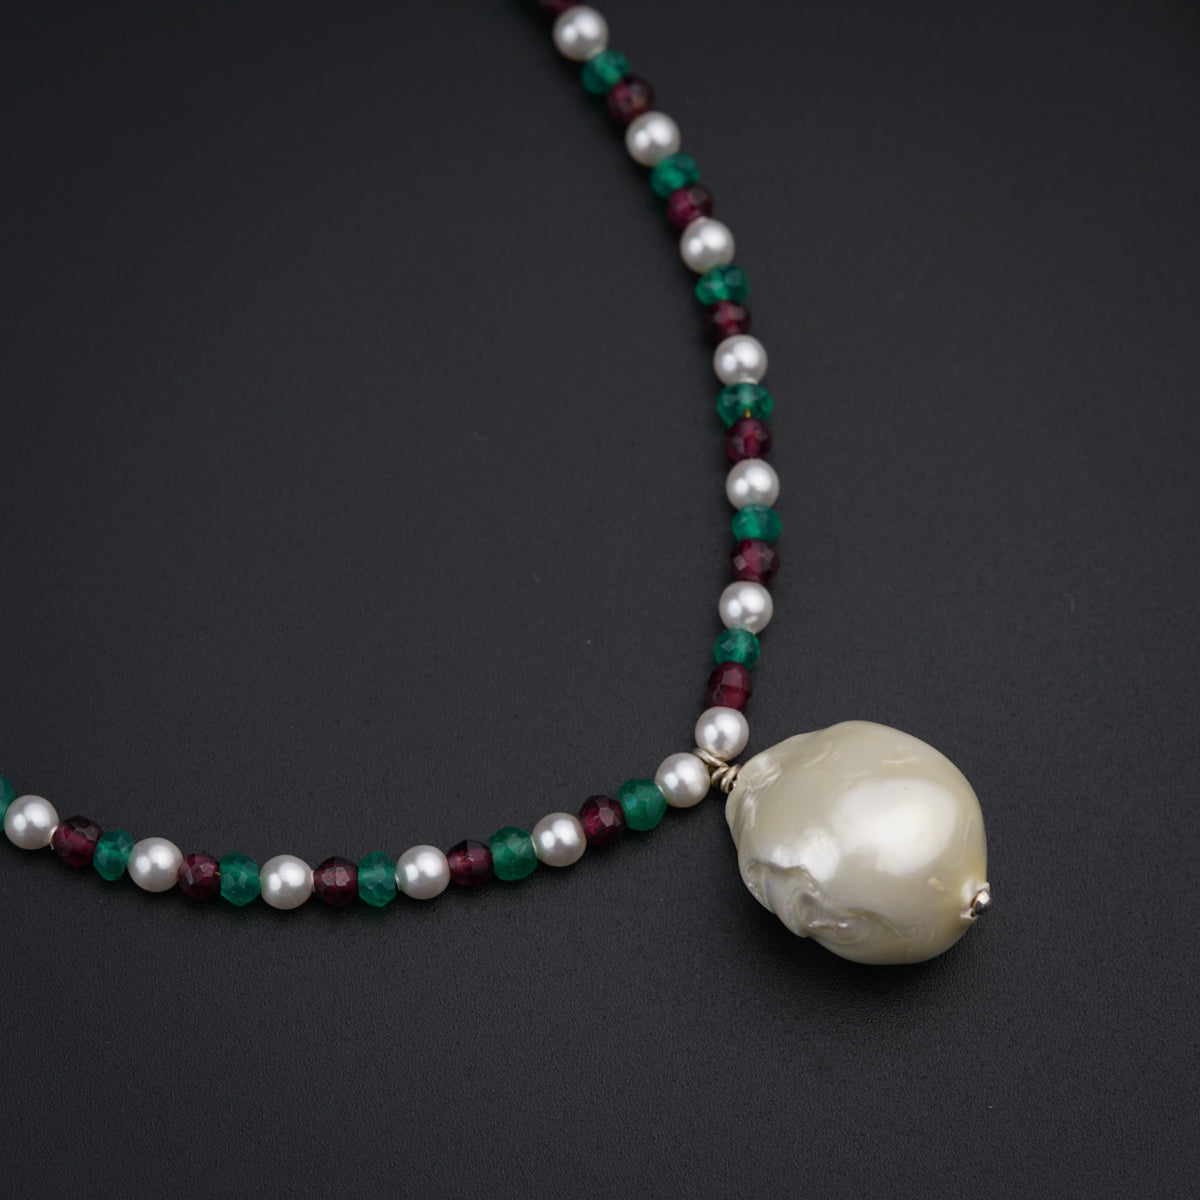 a necklace with a white pearl and green beads